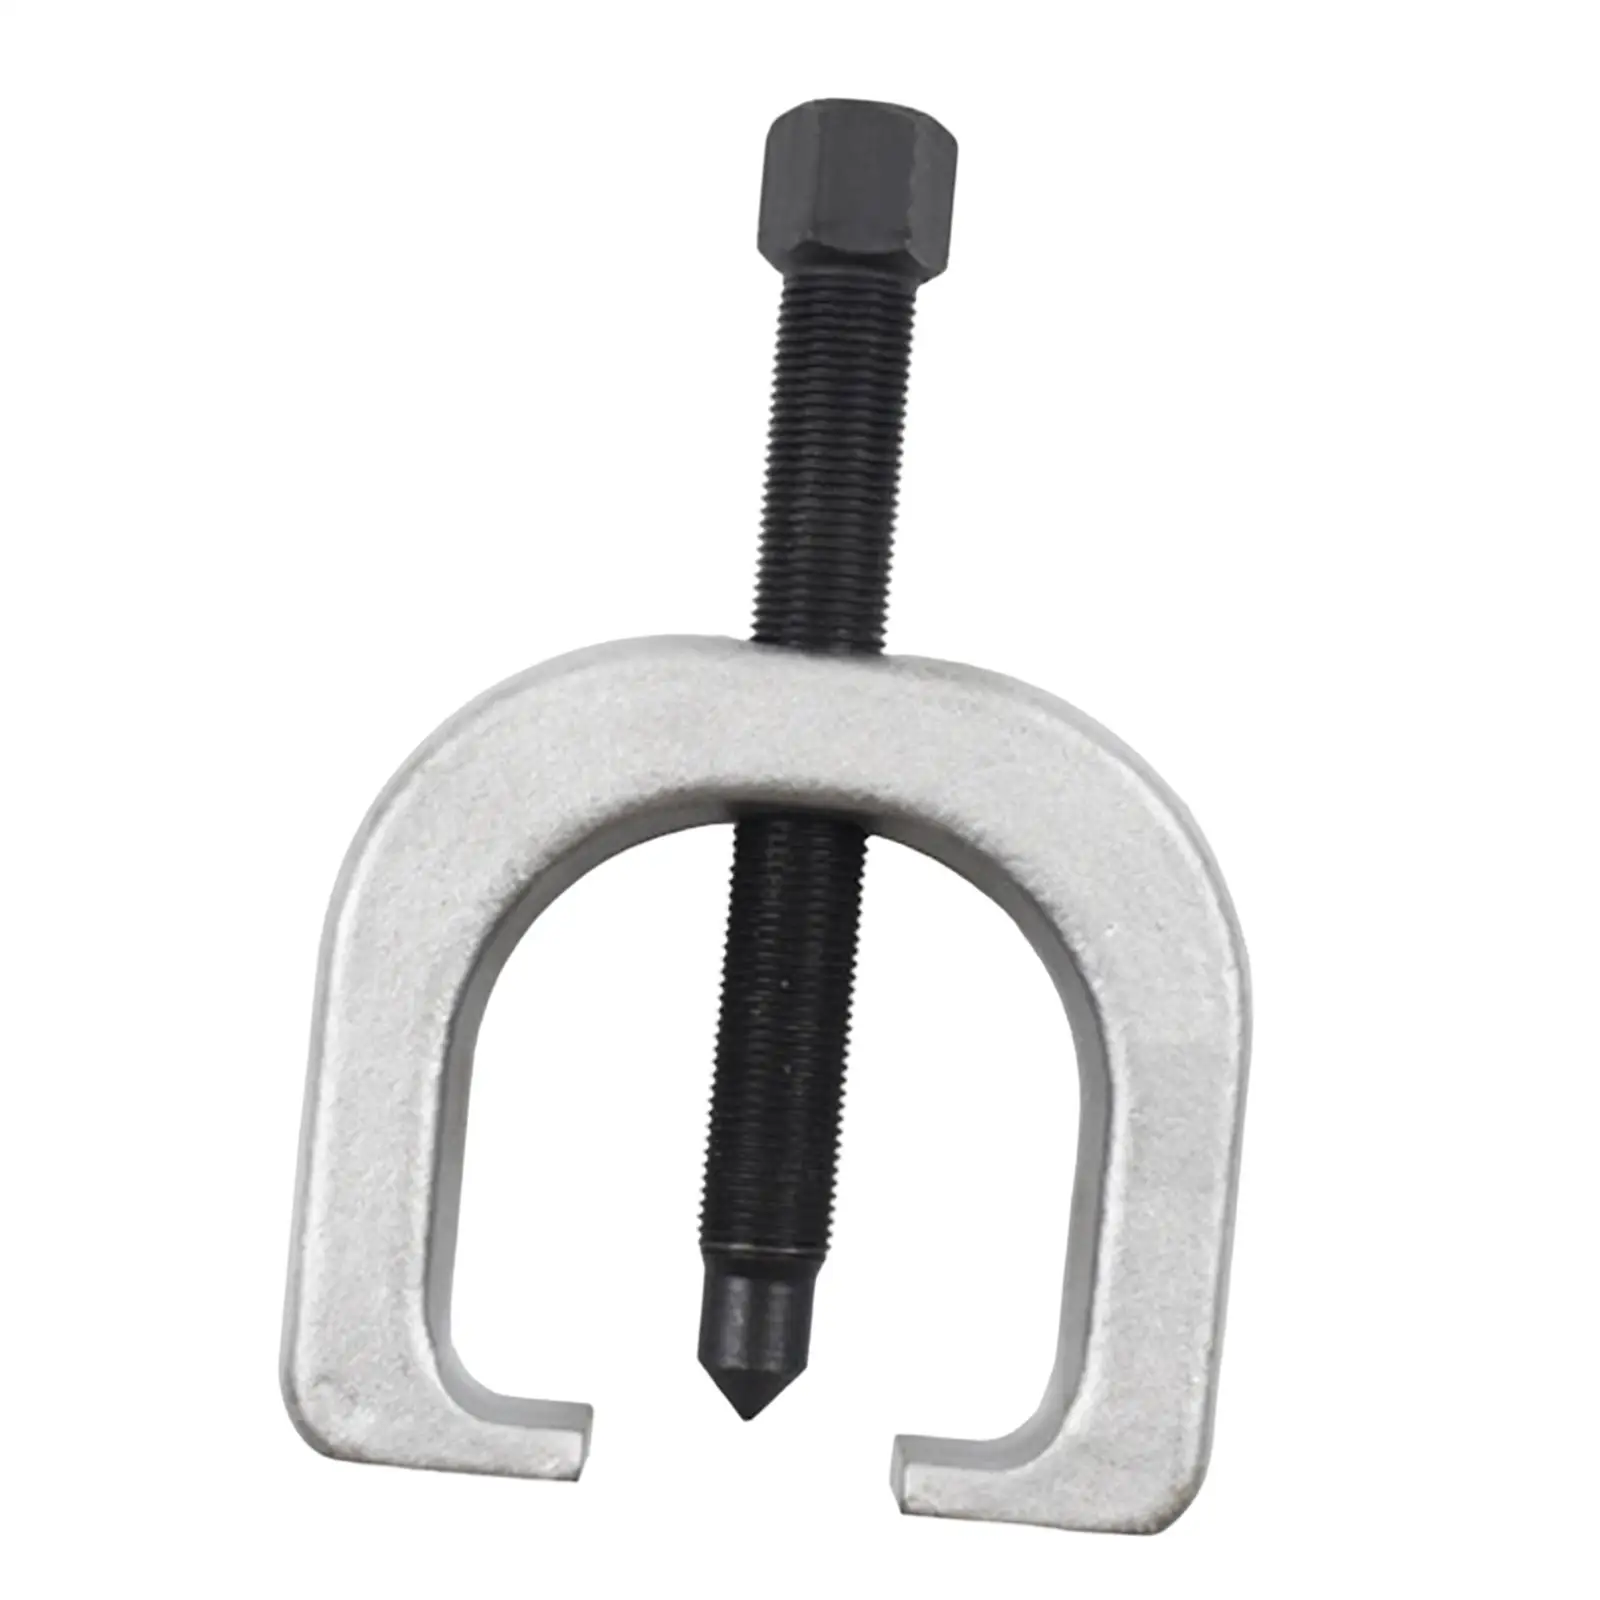 Slack Adjuster Puller Compact Professional Carbon Steel Heavy Duty Sturdy Removal Tool Repair Tool for Trailers Trucks